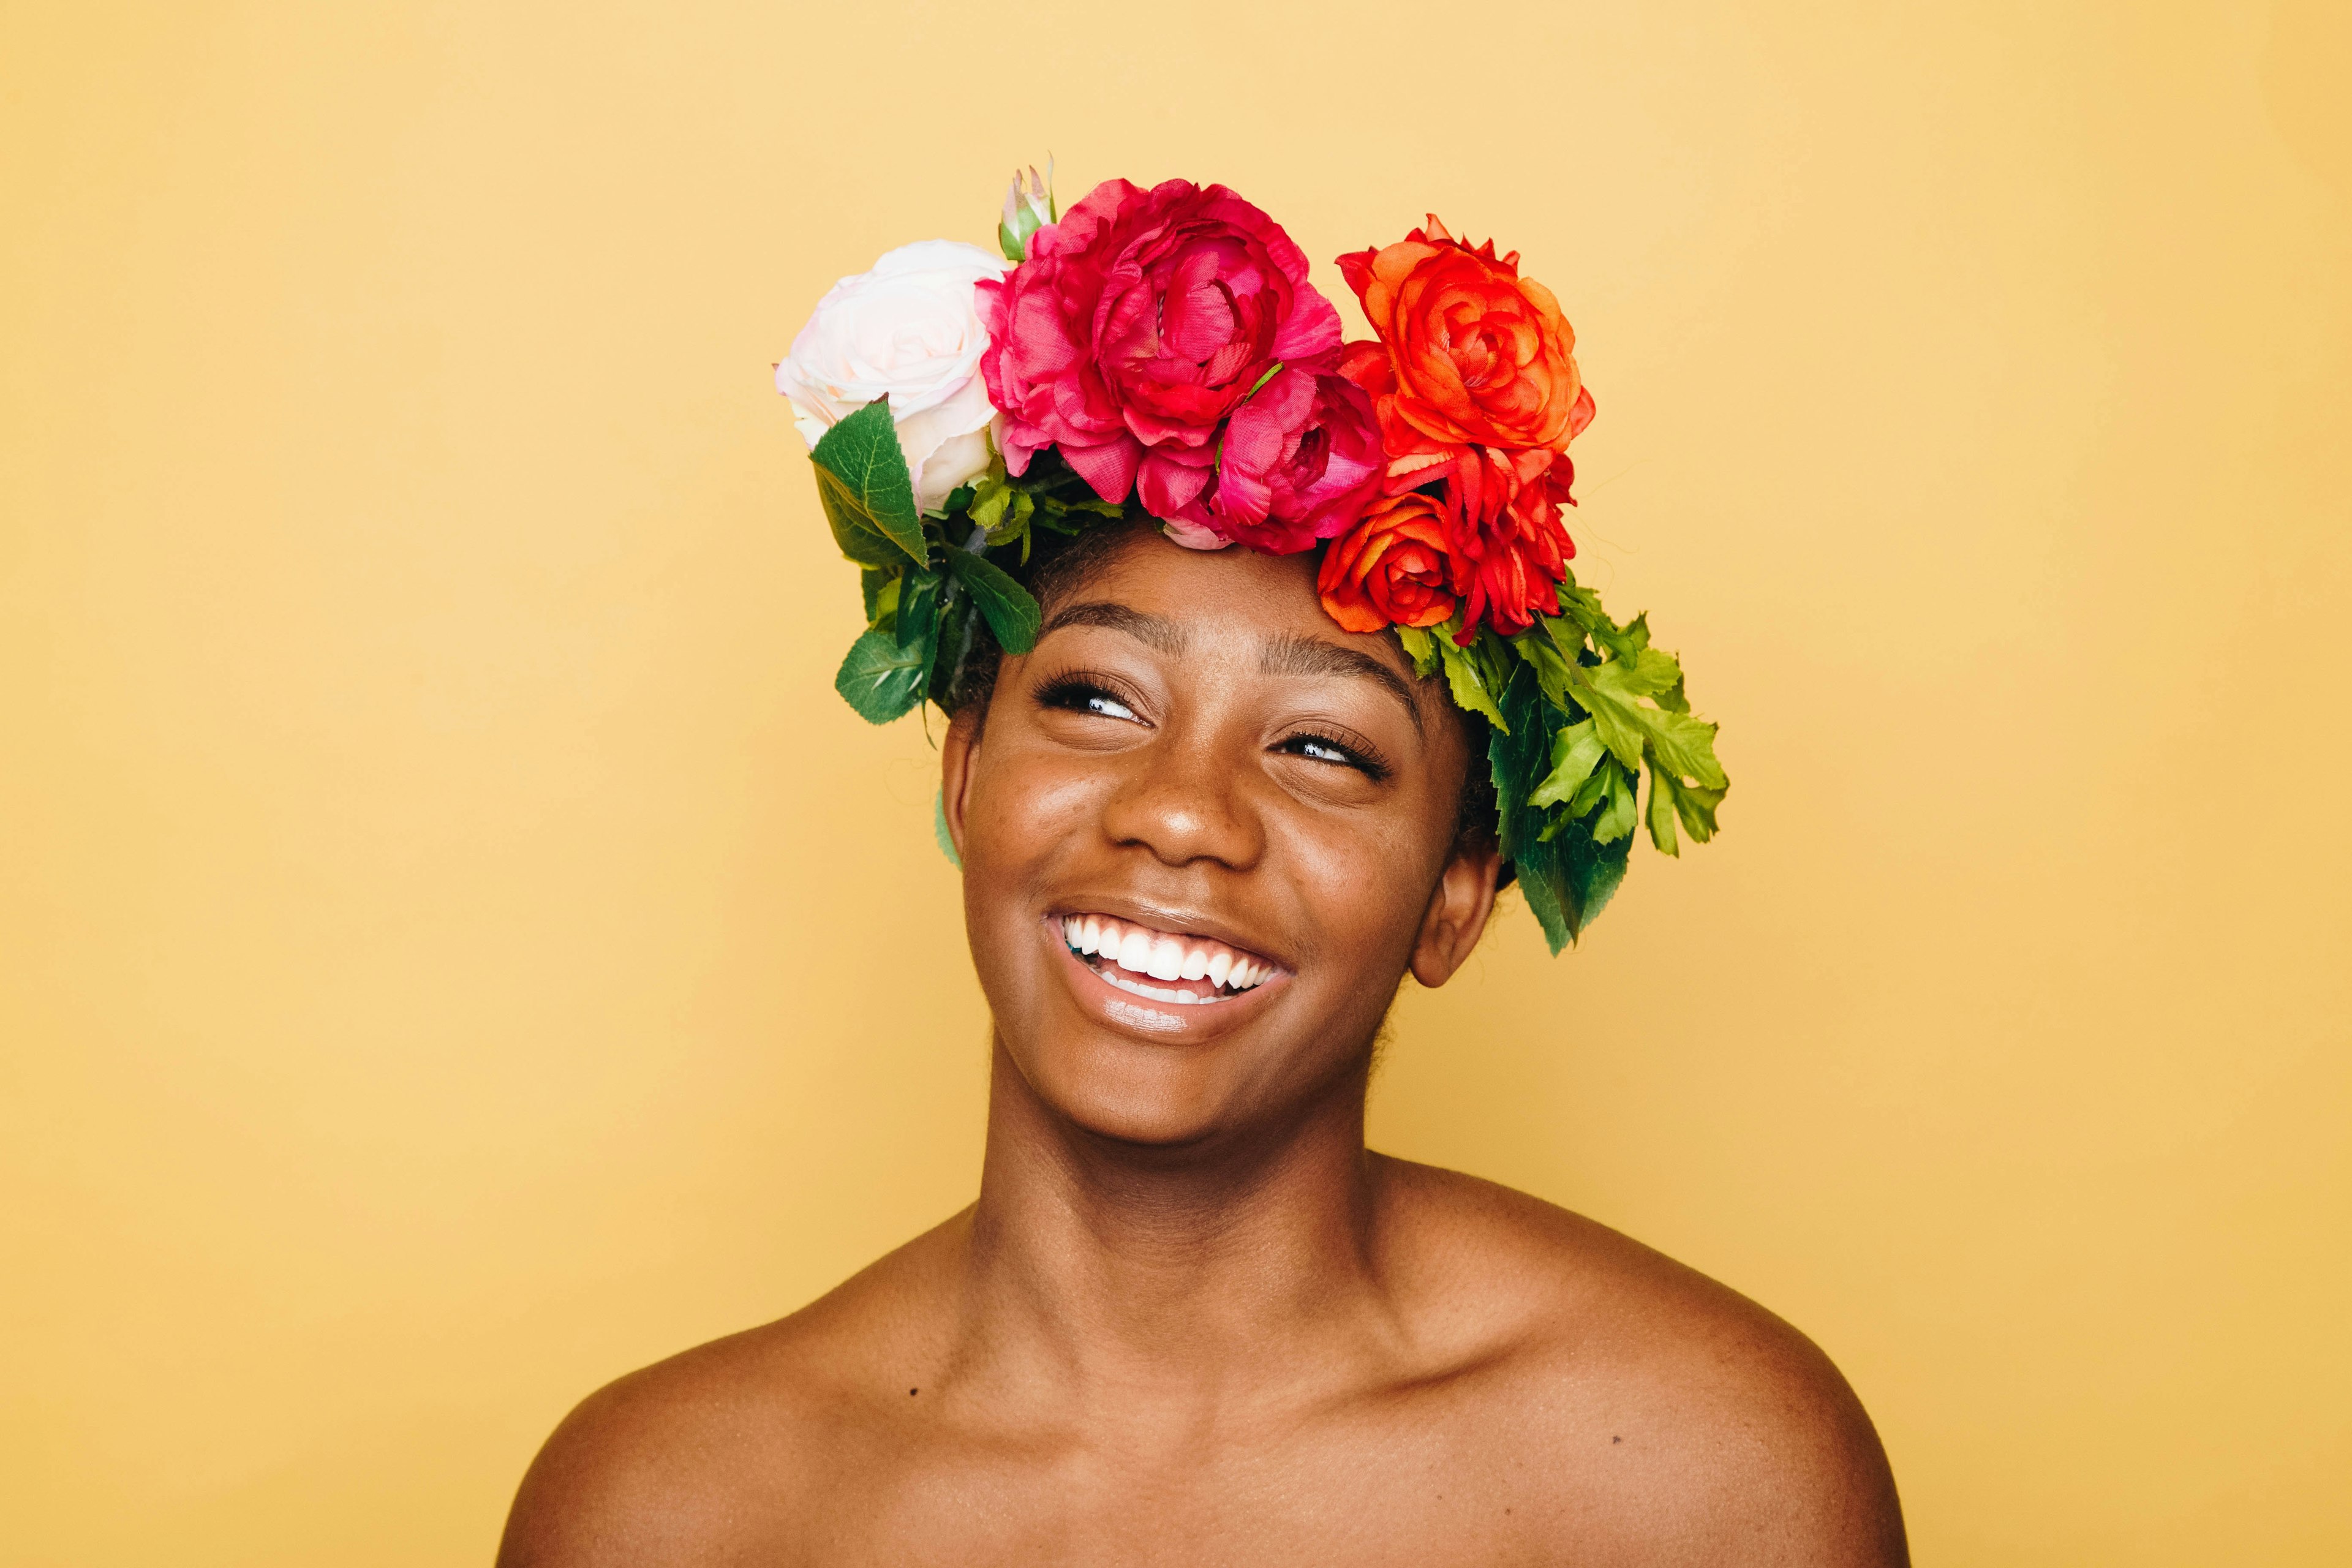 A smiling woman wearing a headdress made of flowers.